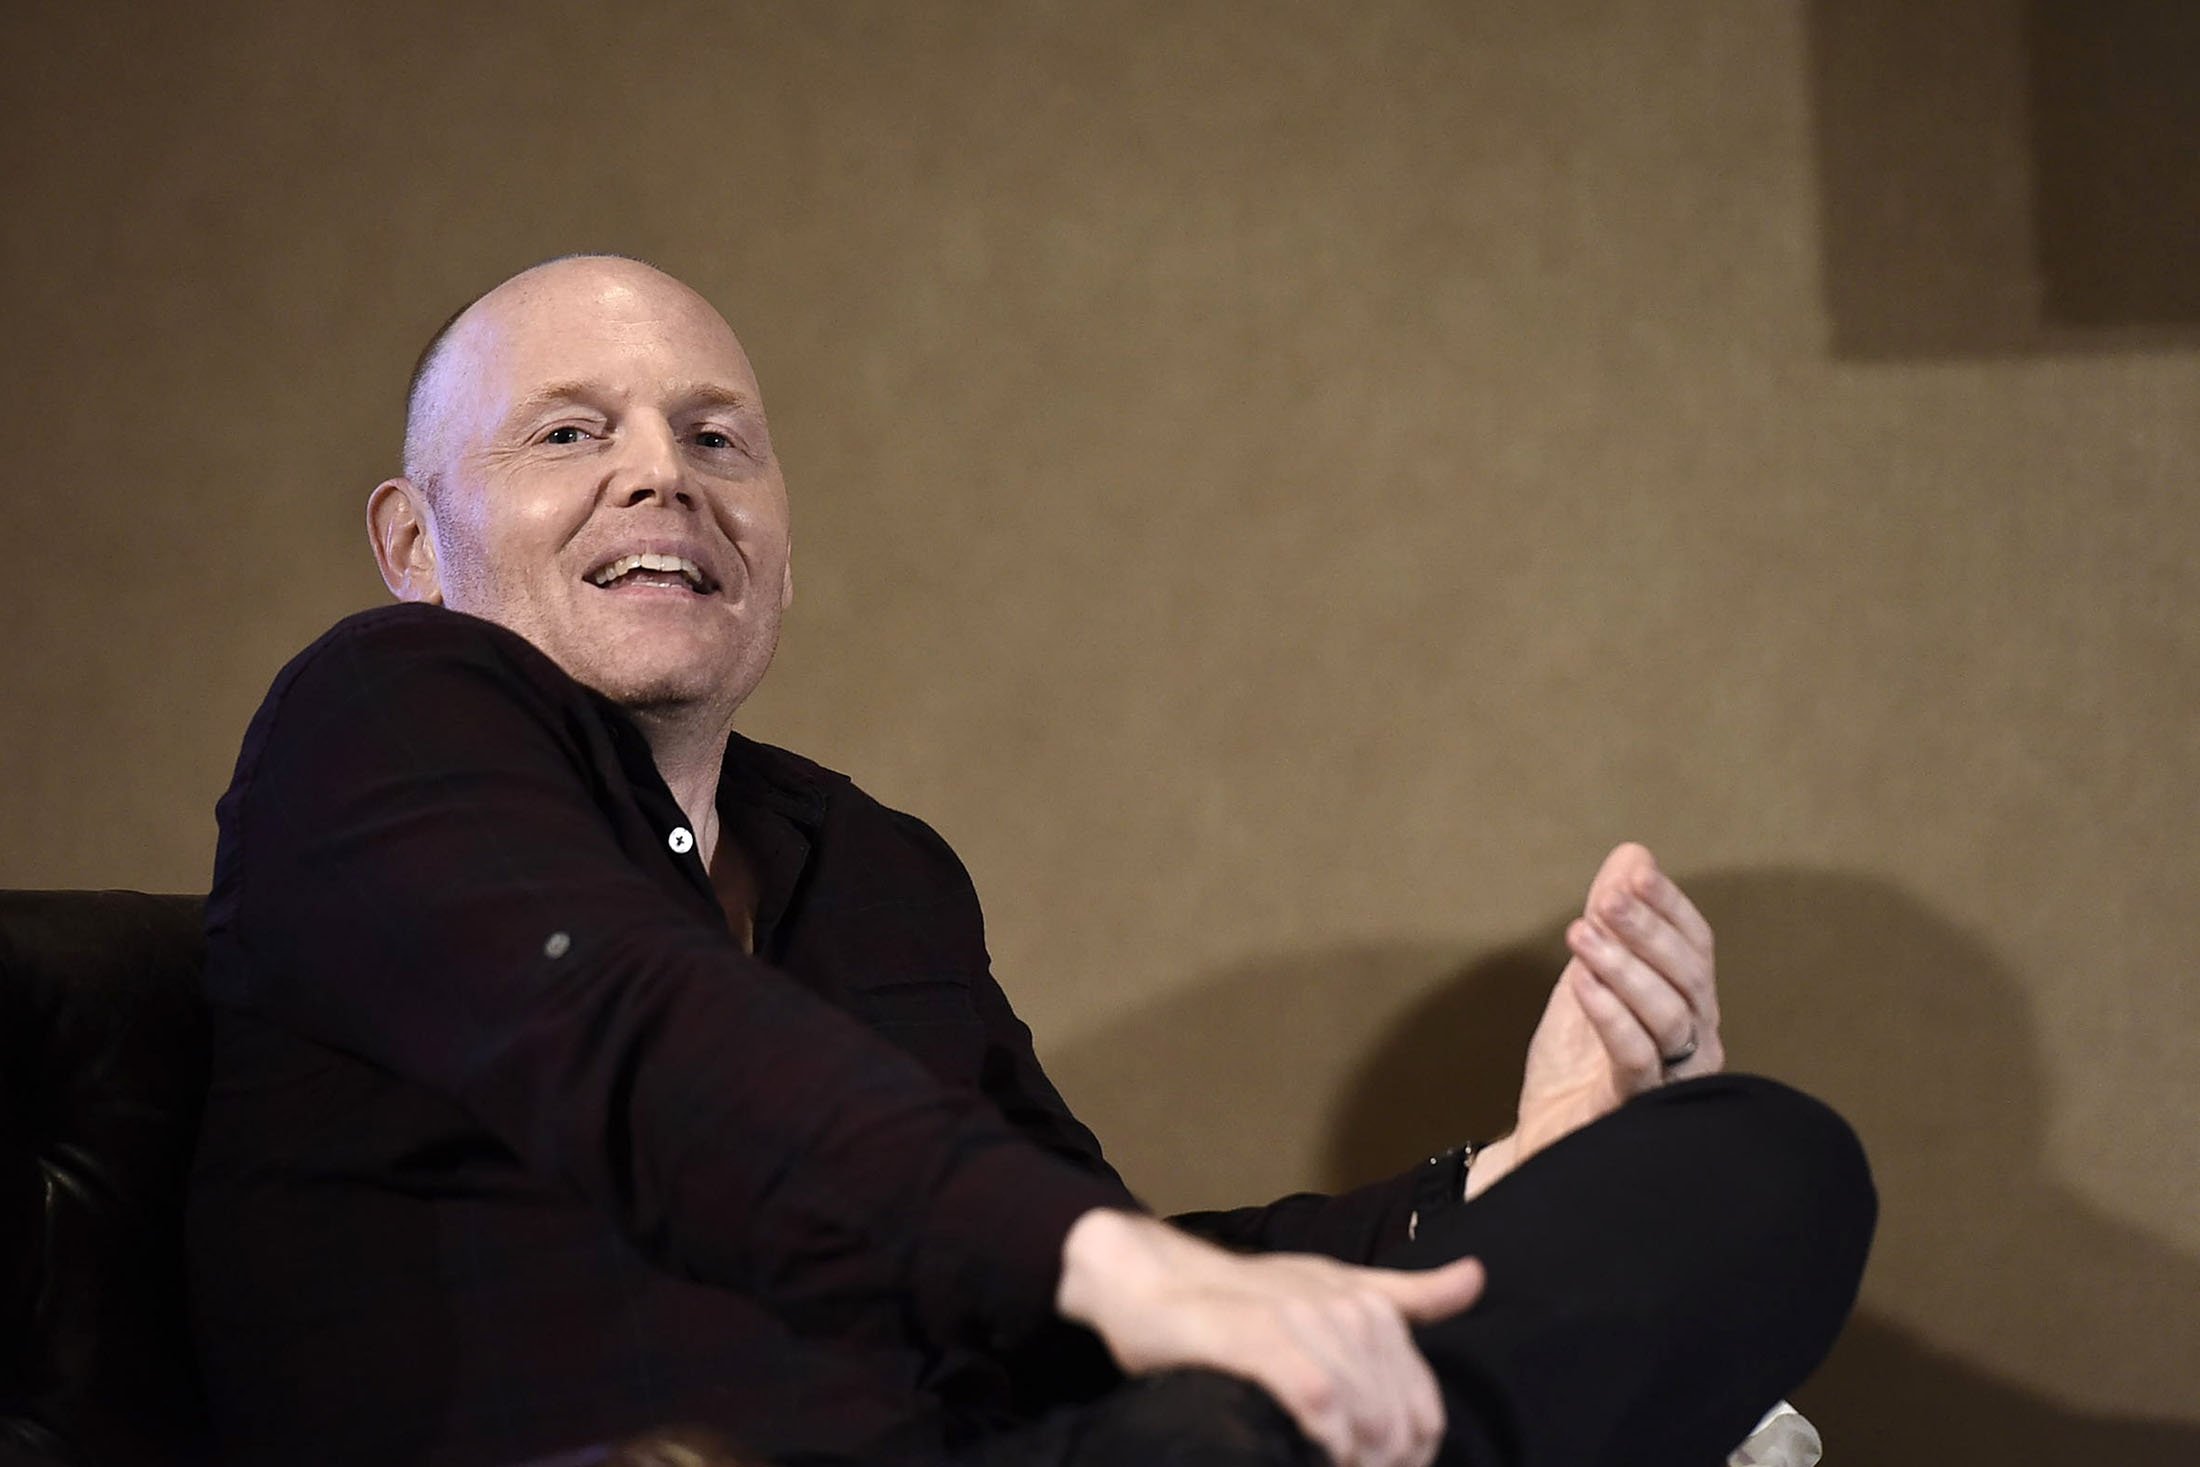 Bill Burr speaks at Keep Netflix Weird Panel at Netflix 2016 Summer TCA at the Beverly Hilton Hotel, in Los Angeles, U.S., July 27, 2016. (AP Photo)